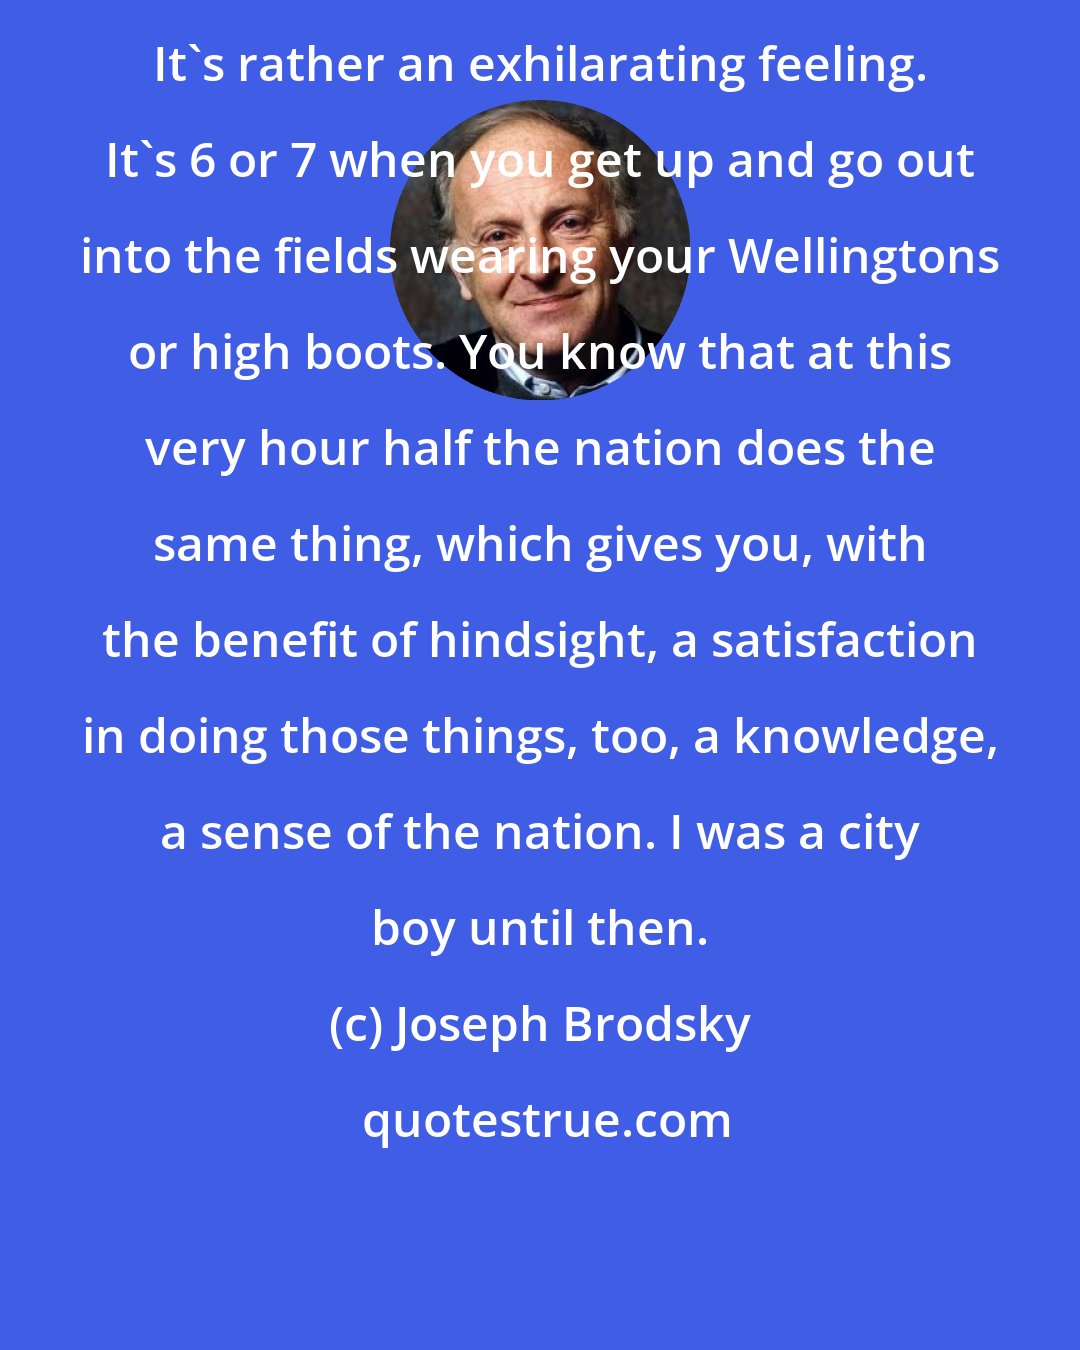 Joseph Brodsky: It's rather an exhilarating feeling. It's 6 or 7 when you get up and go out into the fields wearing your Wellingtons or high boots. You know that at this very hour half the nation does the same thing, which gives you, with the benefit of hindsight, a satisfaction in doing those things, too, a knowledge, a sense of the nation. I was a city boy until then.